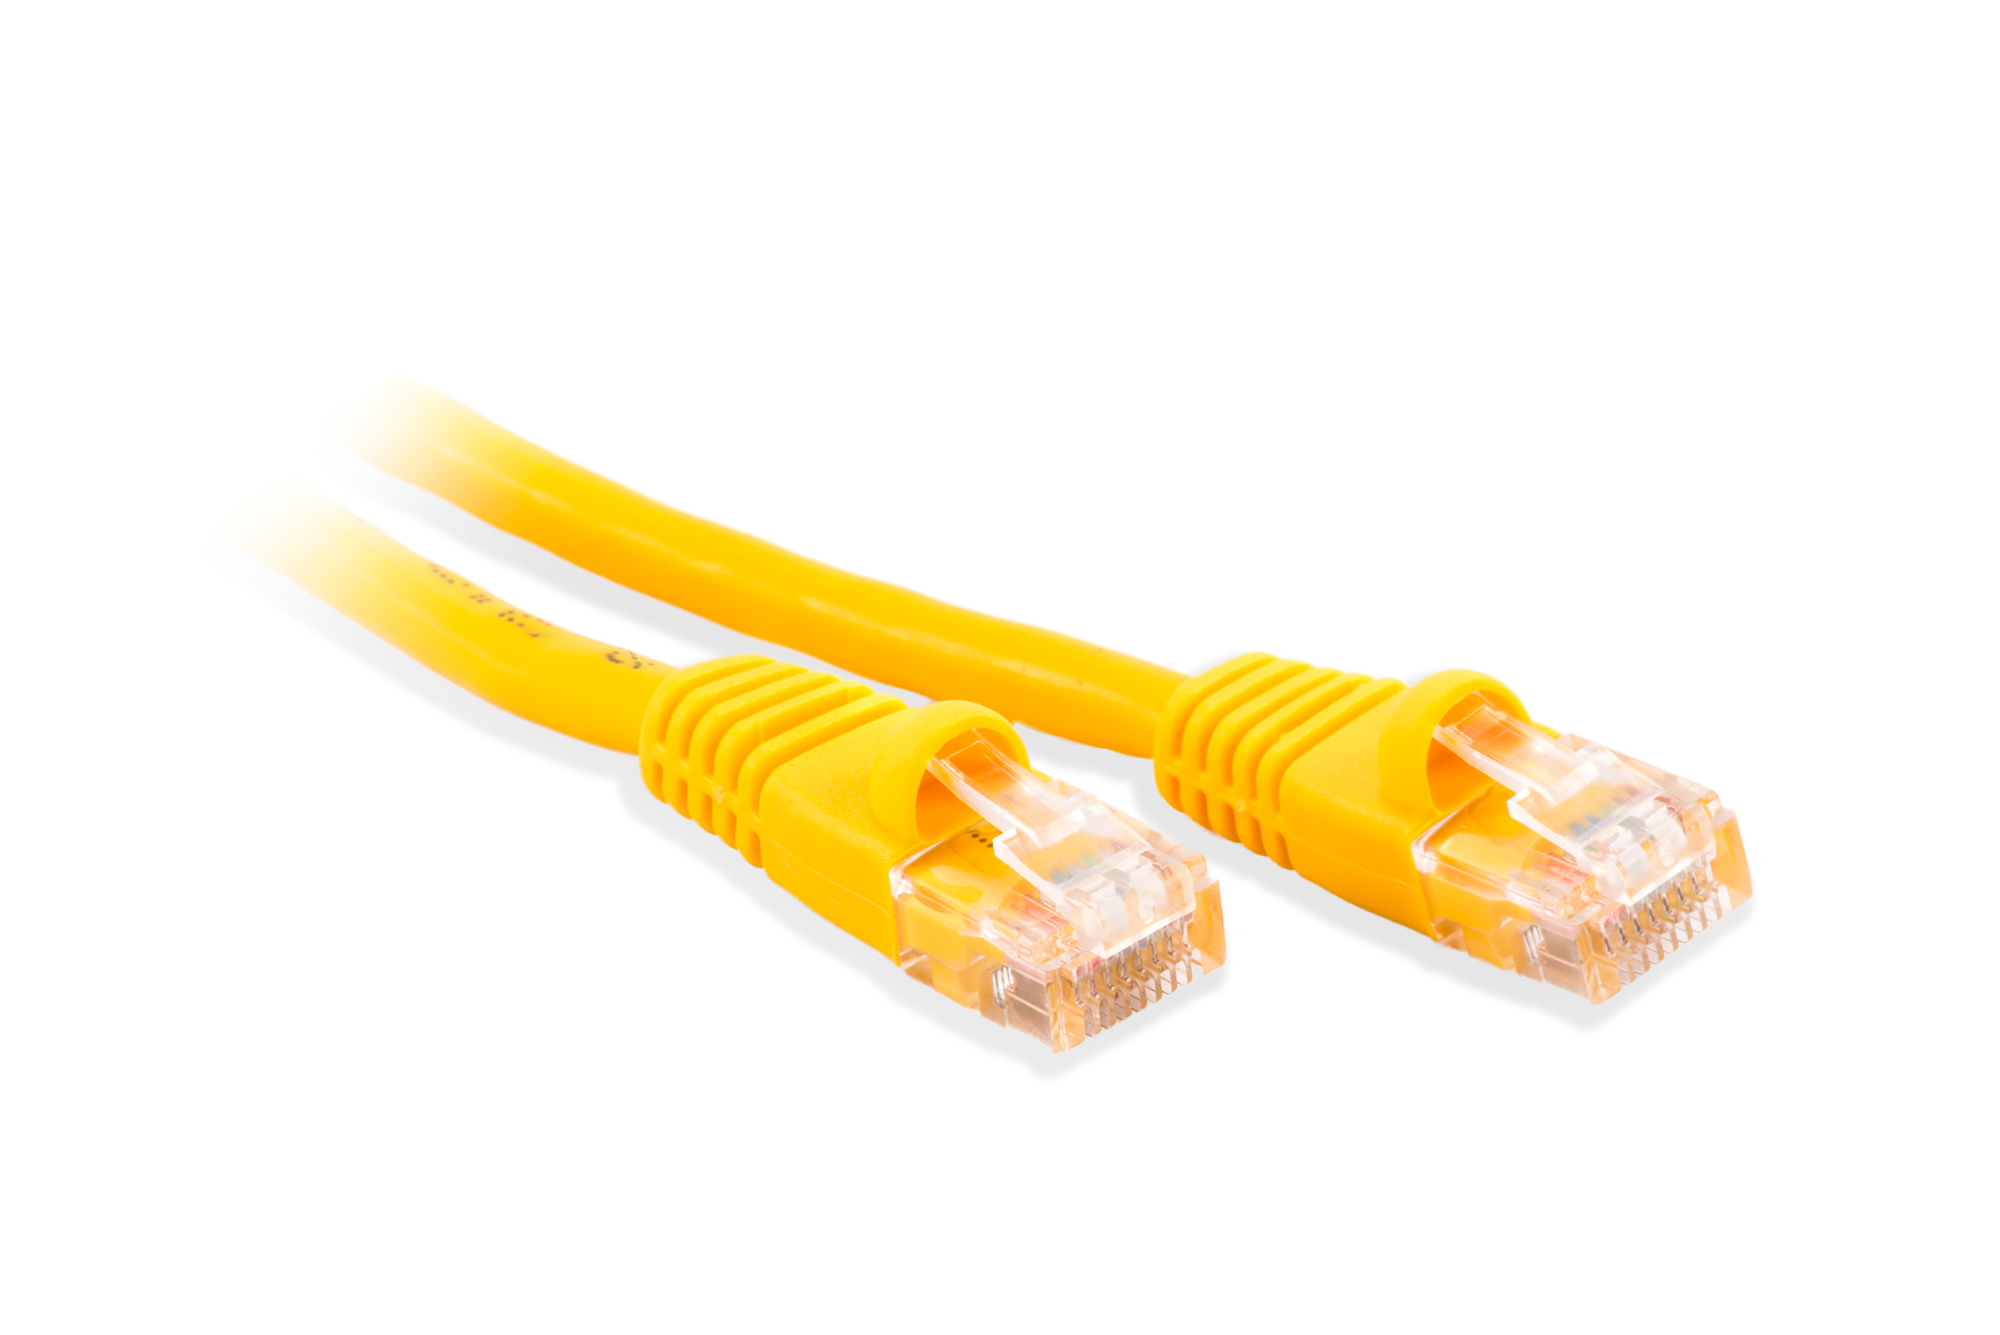 0.5ft Cat5e Ethernet Patch Cable - Yellow Color - Snagless Boot